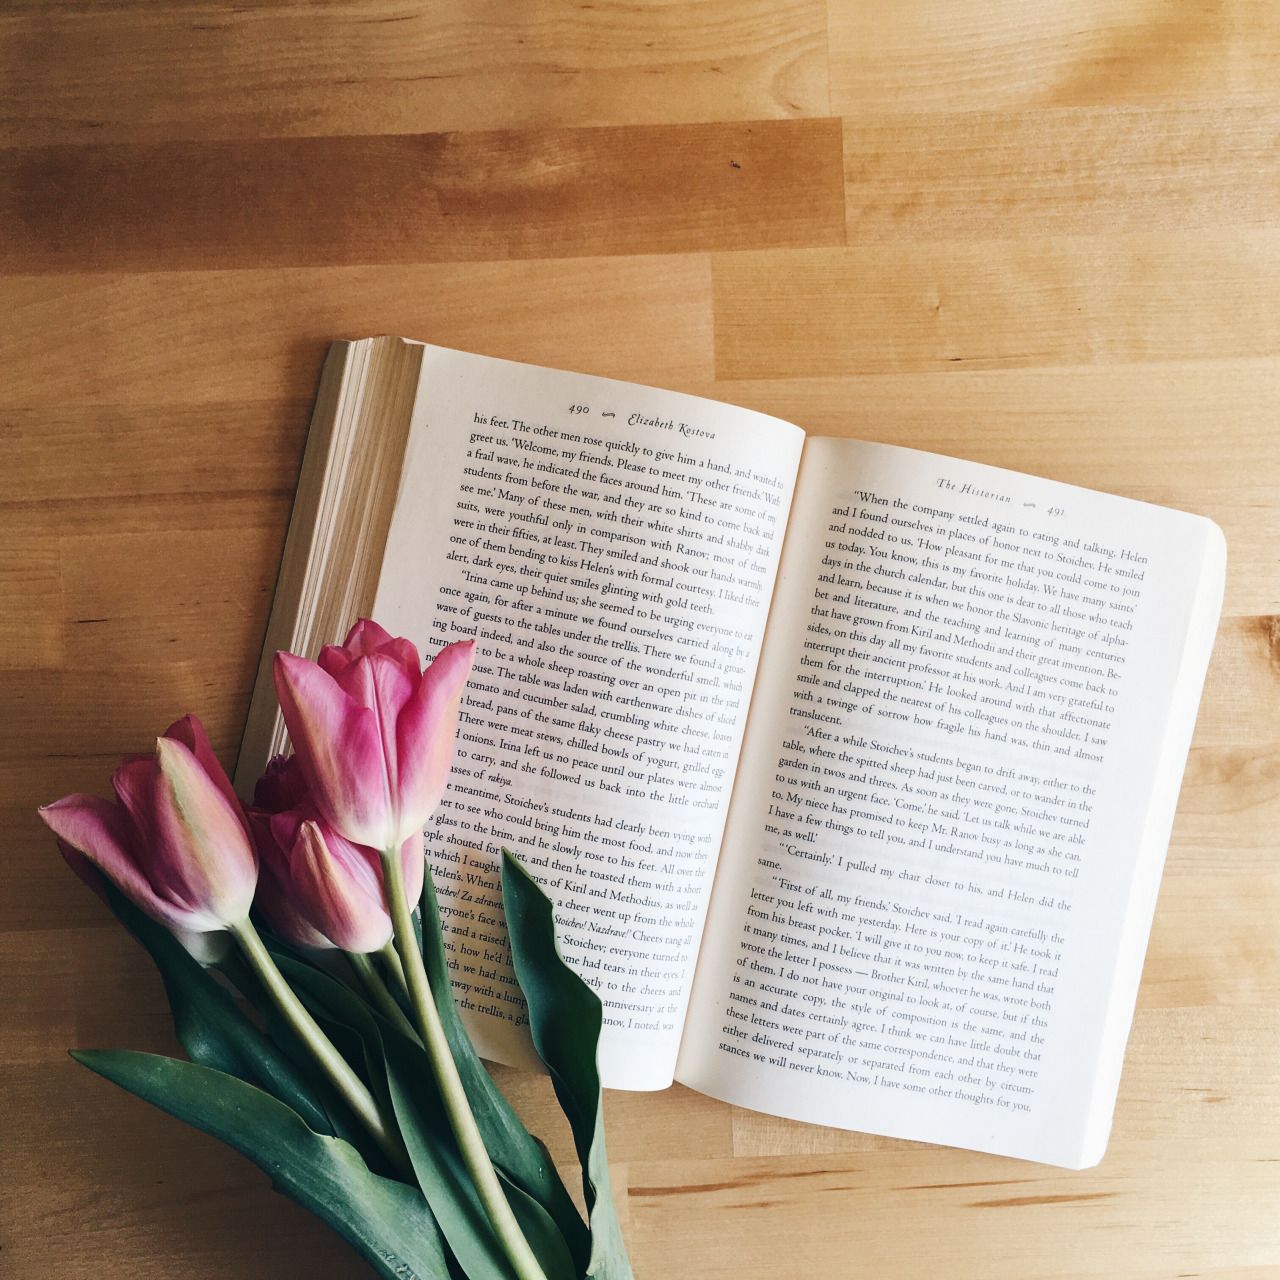 readstoescape: “ Books and tulips. My heart ”. Book flowers, Bookstagram inspiration, Books